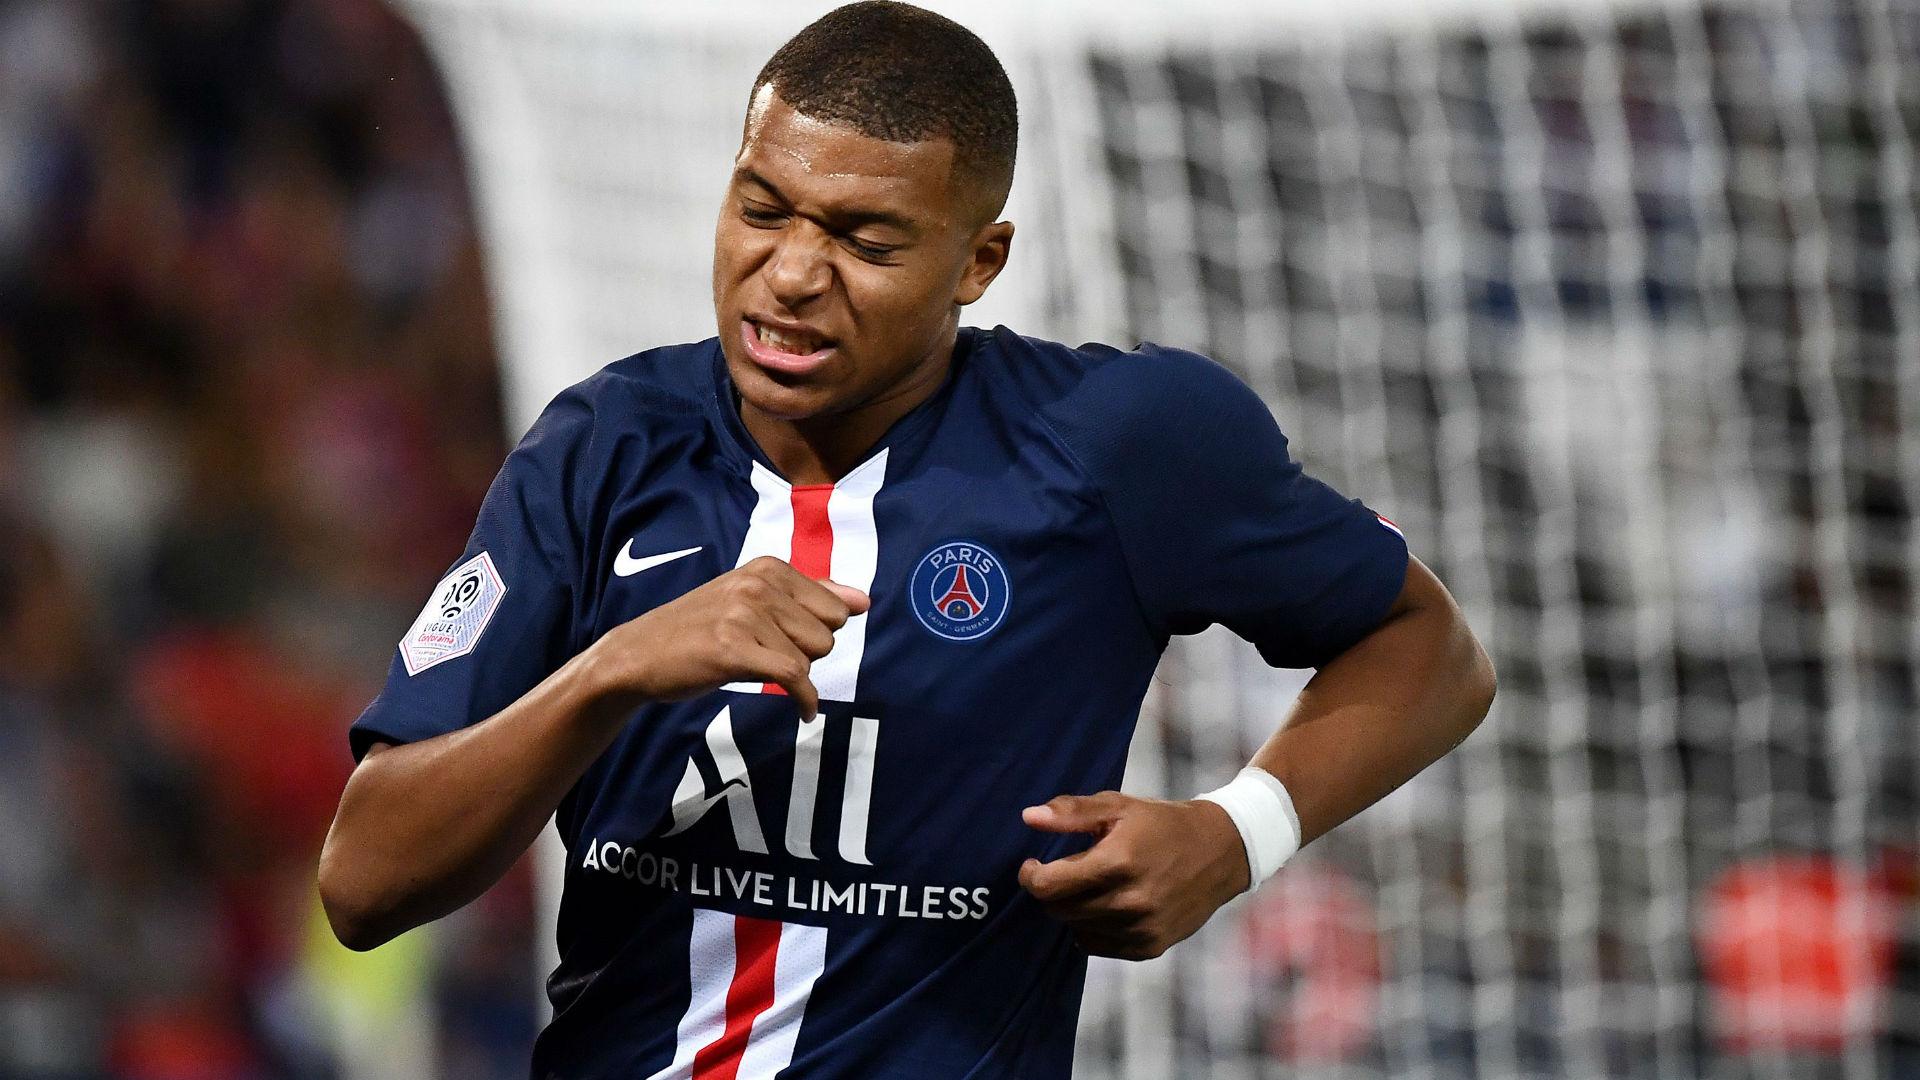 Kylian Mbappe Wallpaper Download High Quality HD Image